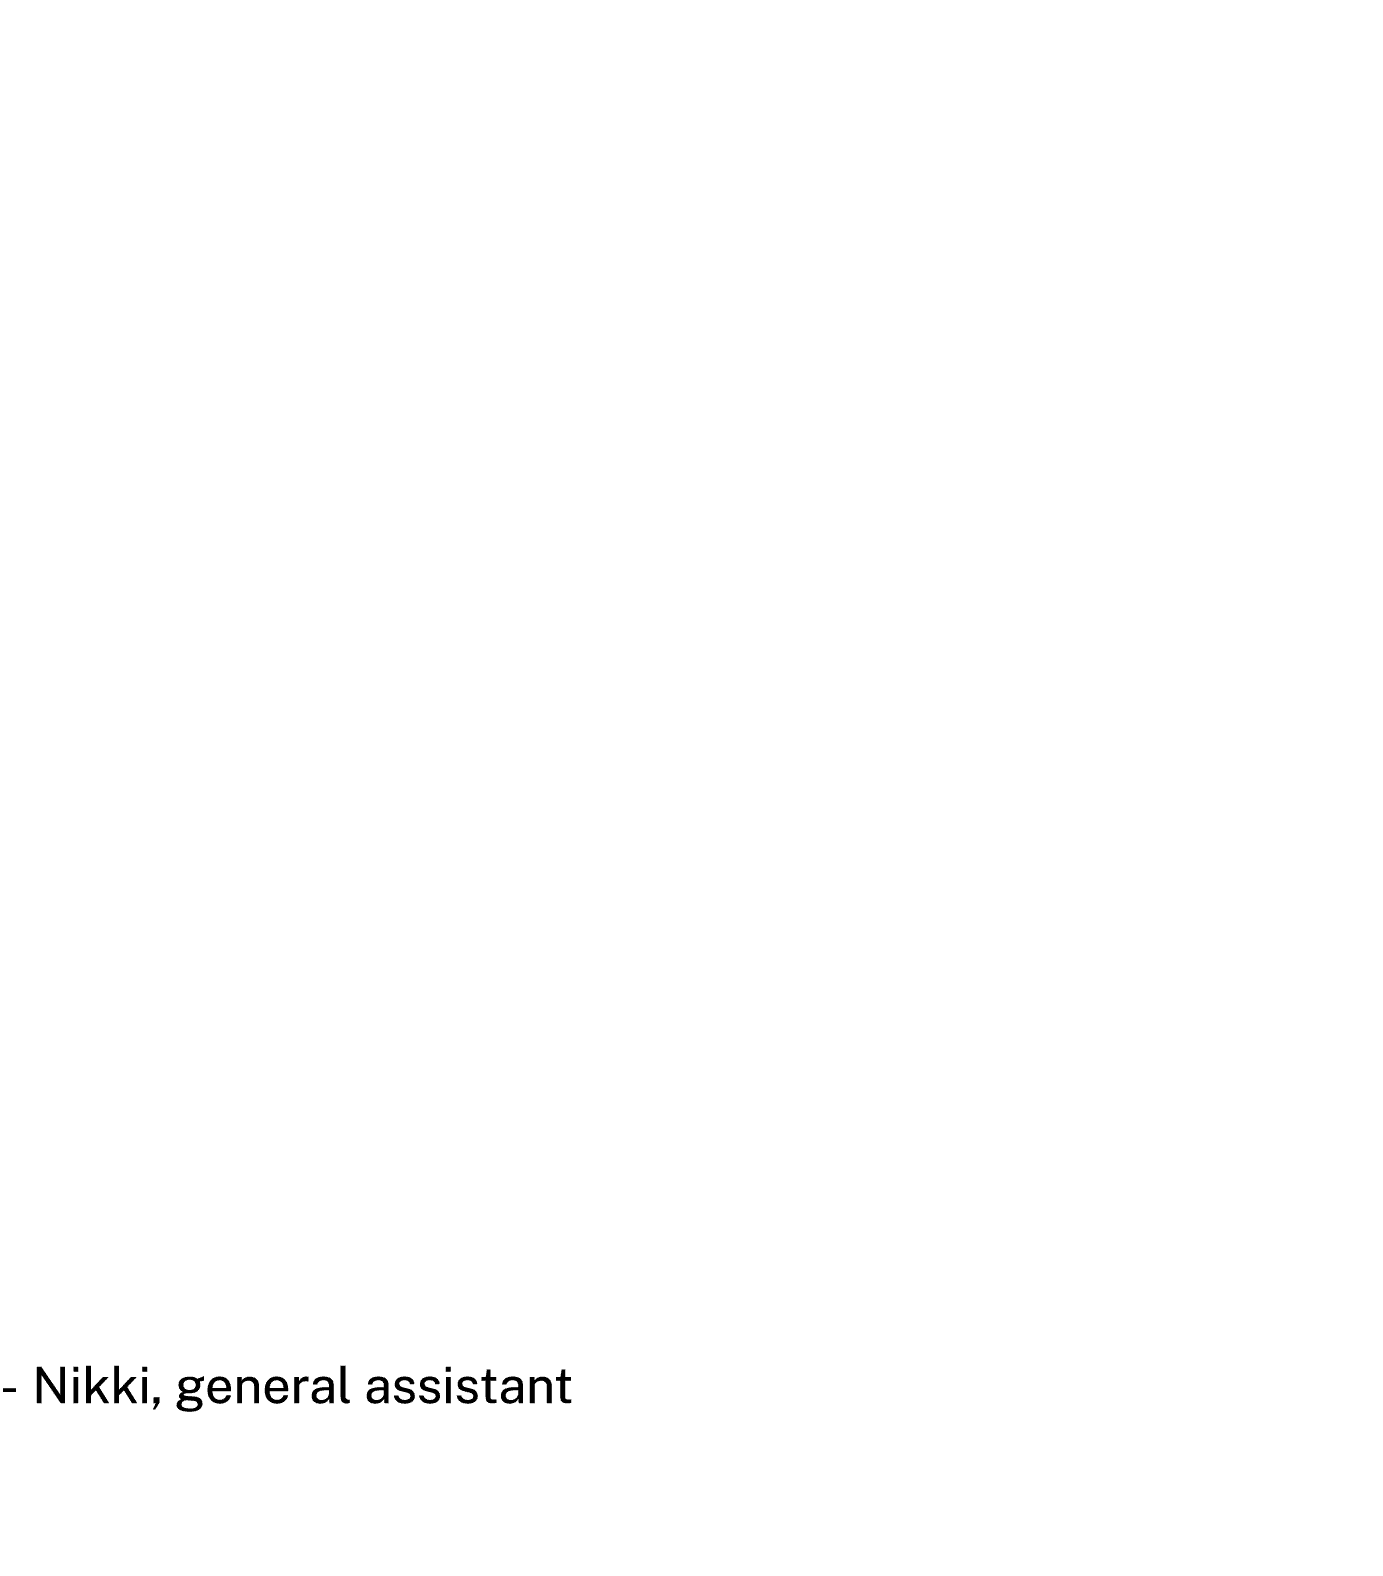 “The grant has given us the chance to kick start the garden again, and we were excited to grow more varieties of frui...